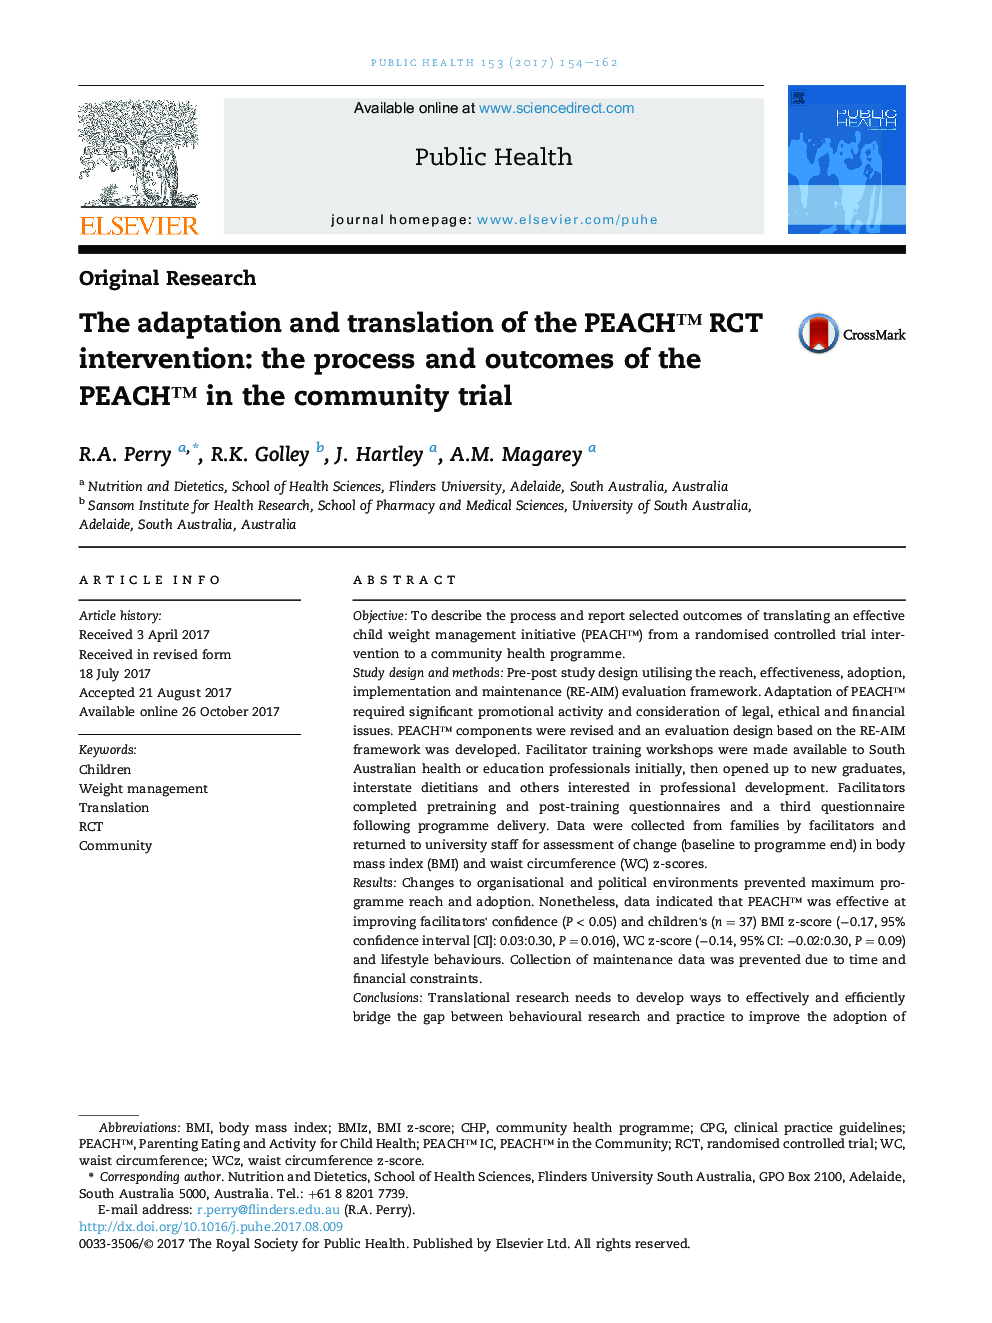 The adaptation and translation of the PEACHâ¢ RCT intervention: the process and outcomes of the PEACHâ¢ in the community trial